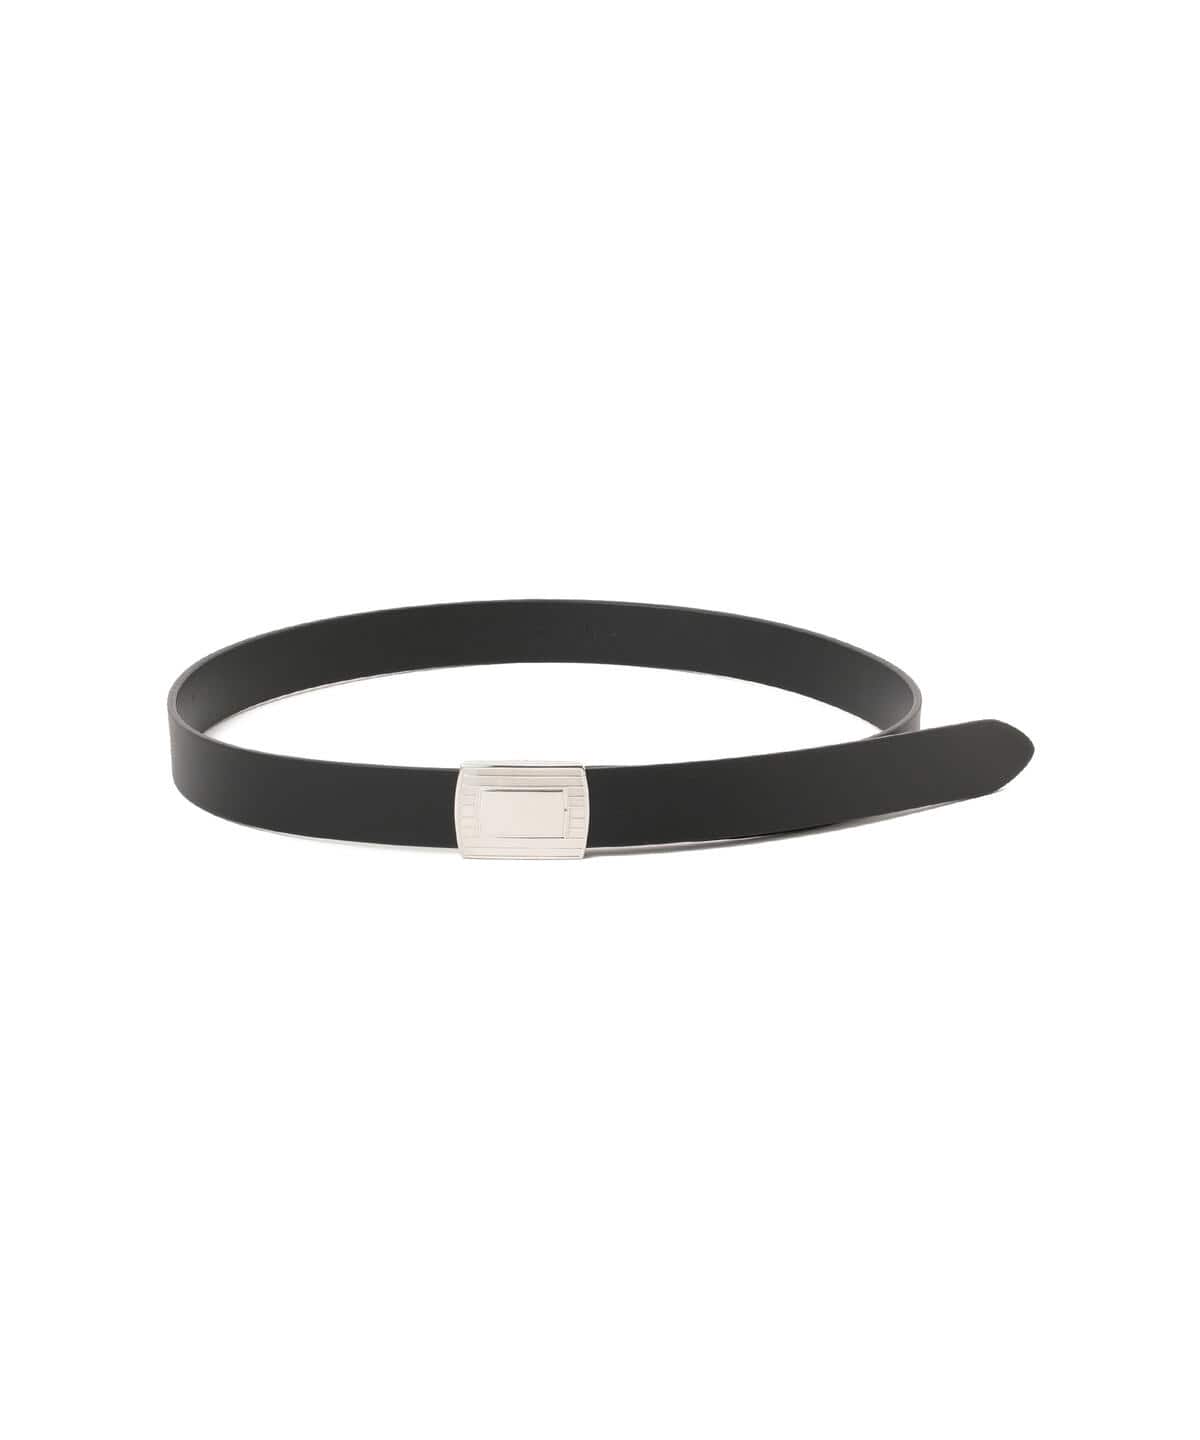 BEAMS F BEAMS Anderson's / Smooth leather belt (fashion 